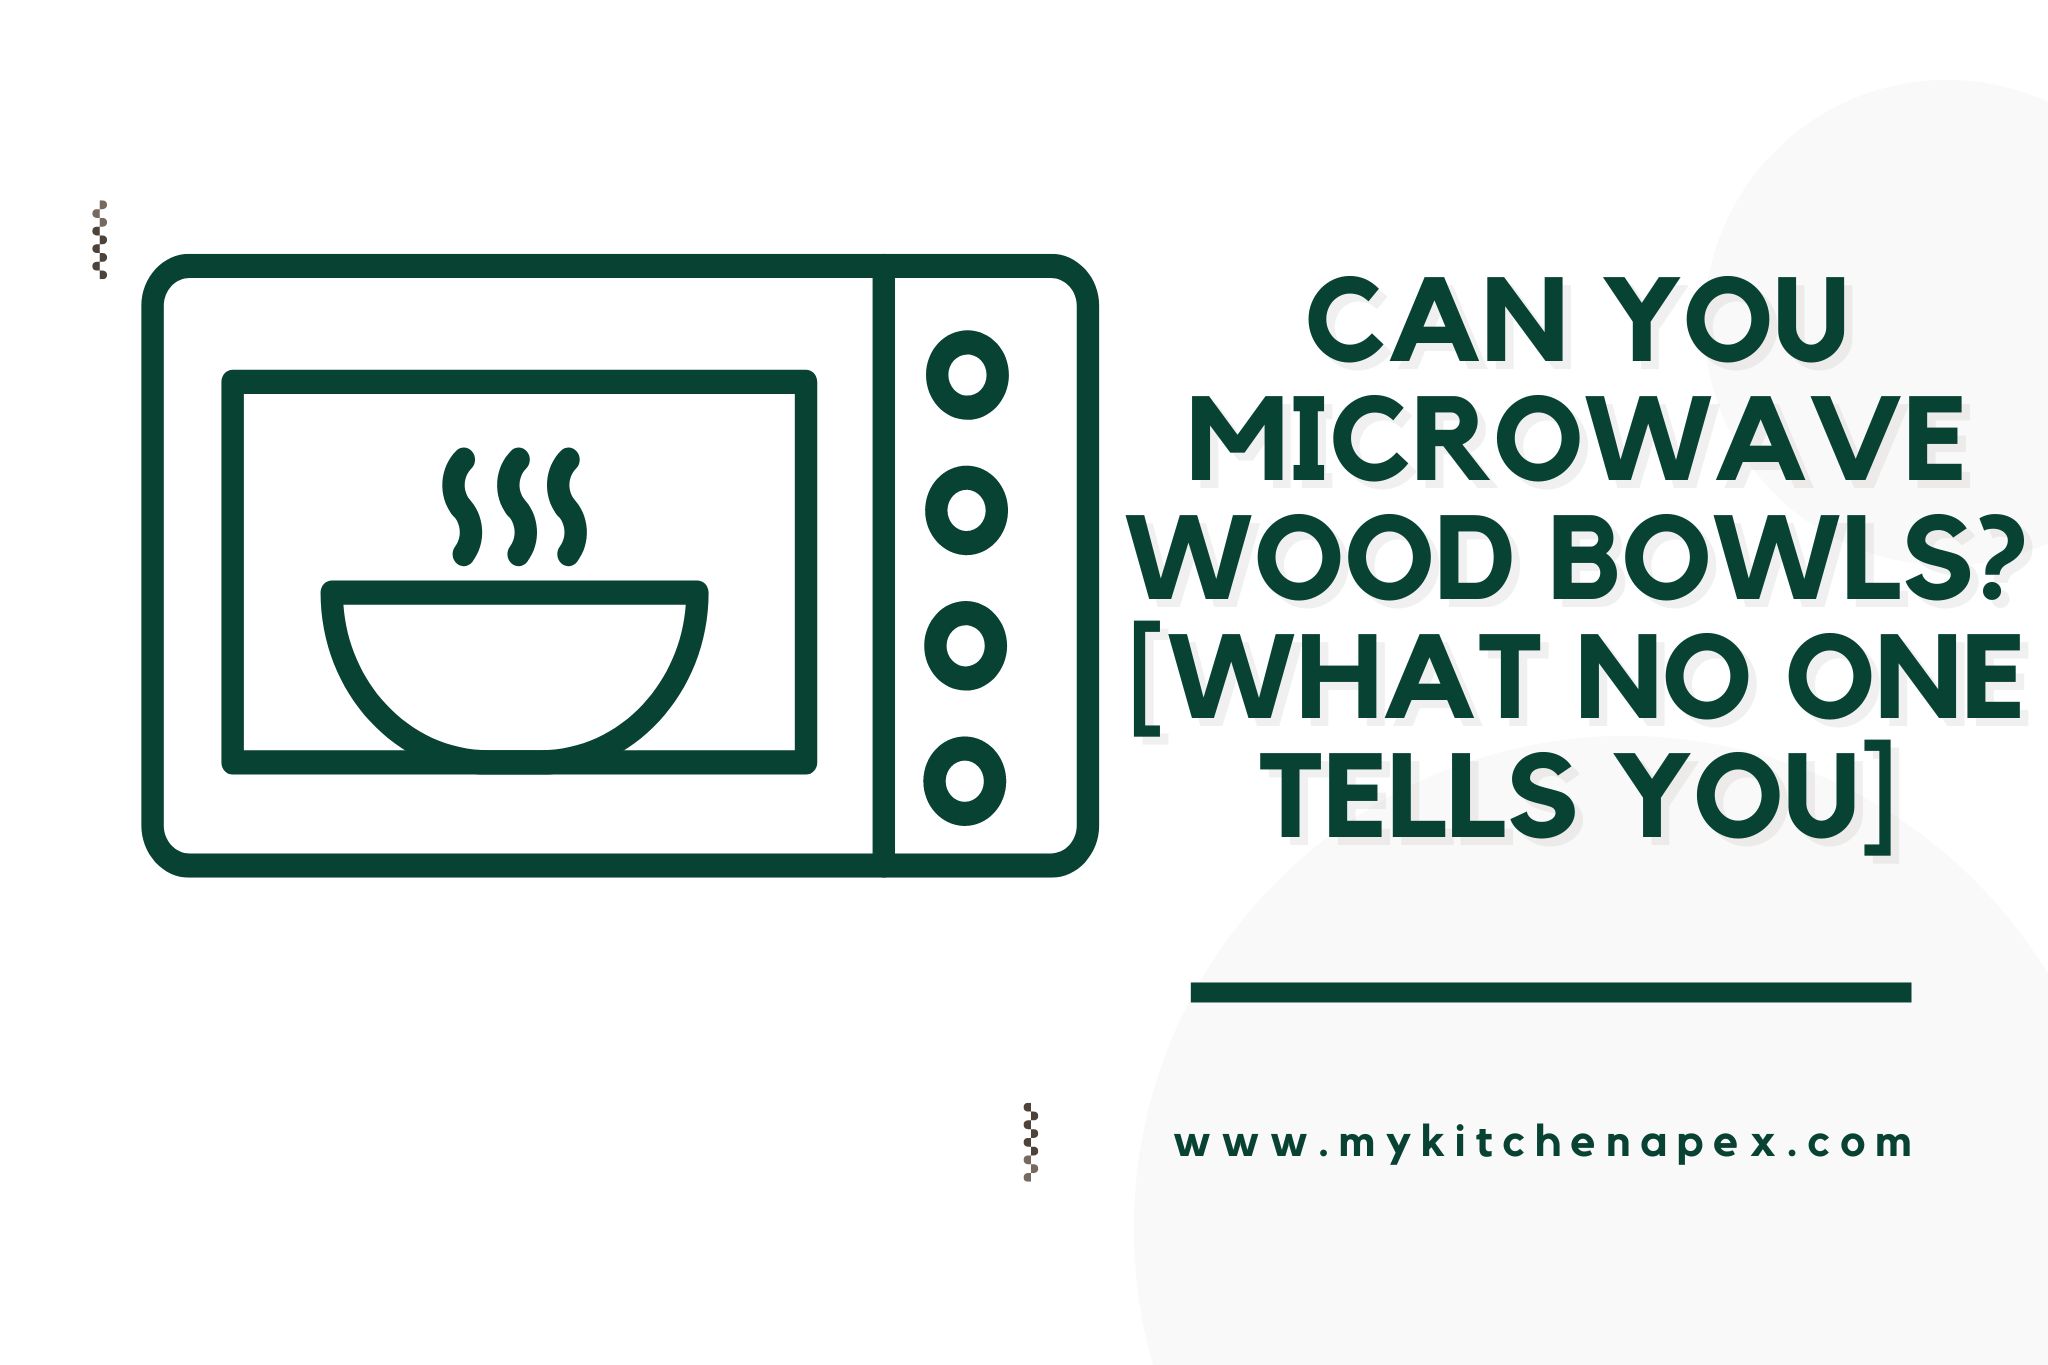 Can You Microwave Wood Bowls? [What No One TELLS You]